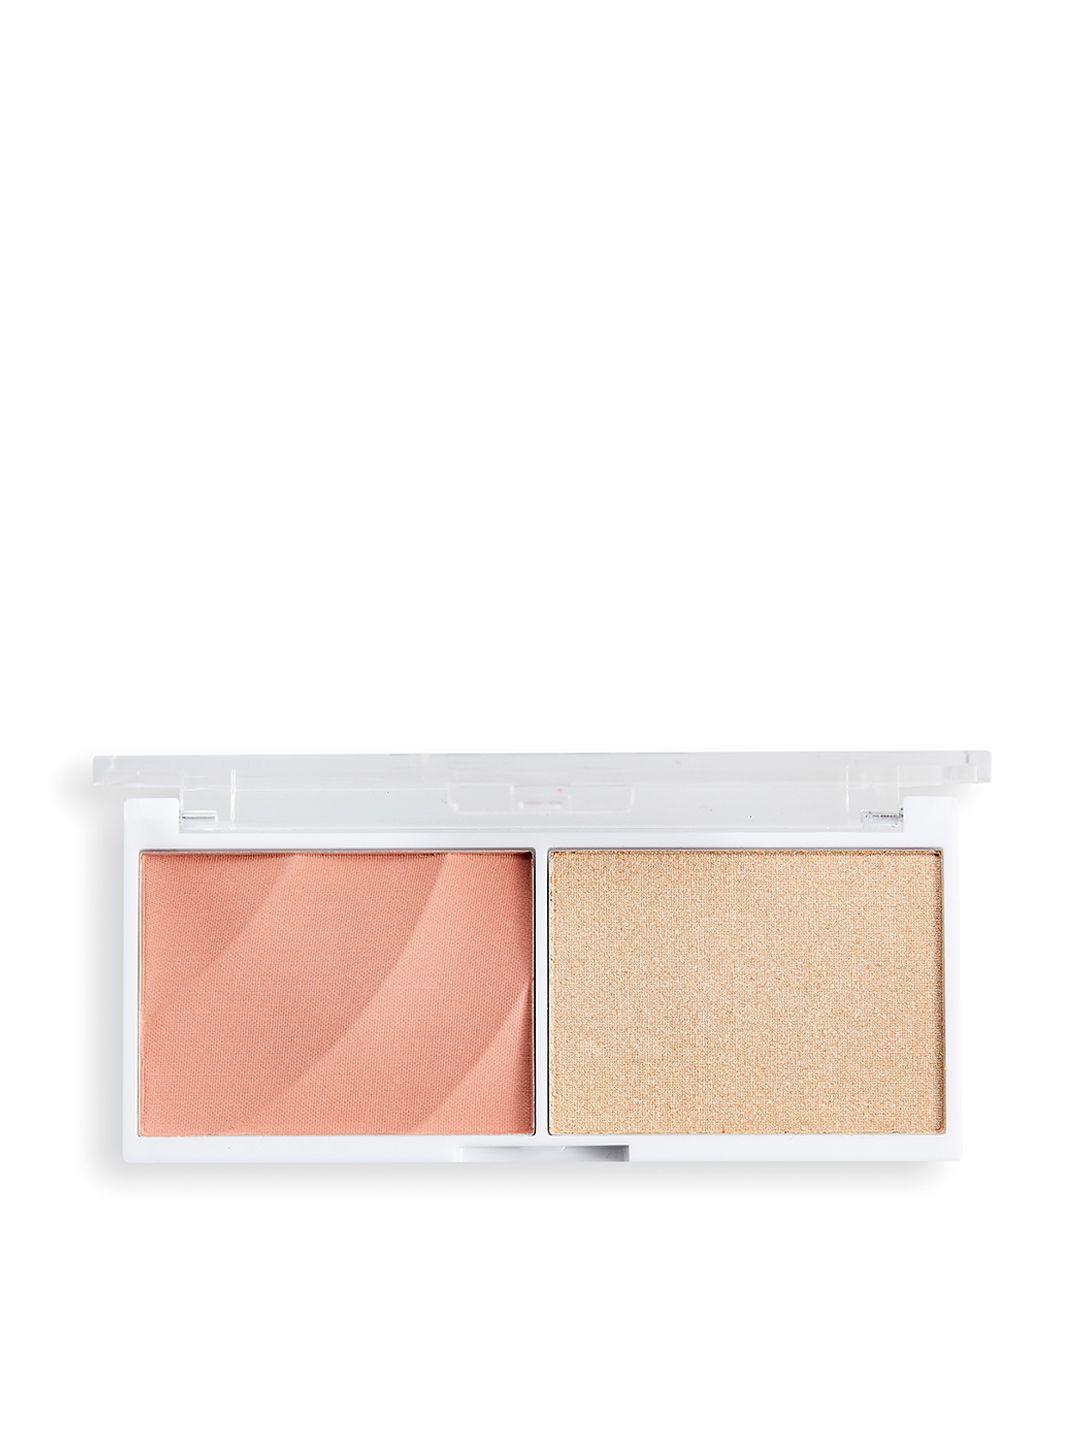 makeup revolution london colour play duo blush & highlighter - sweet